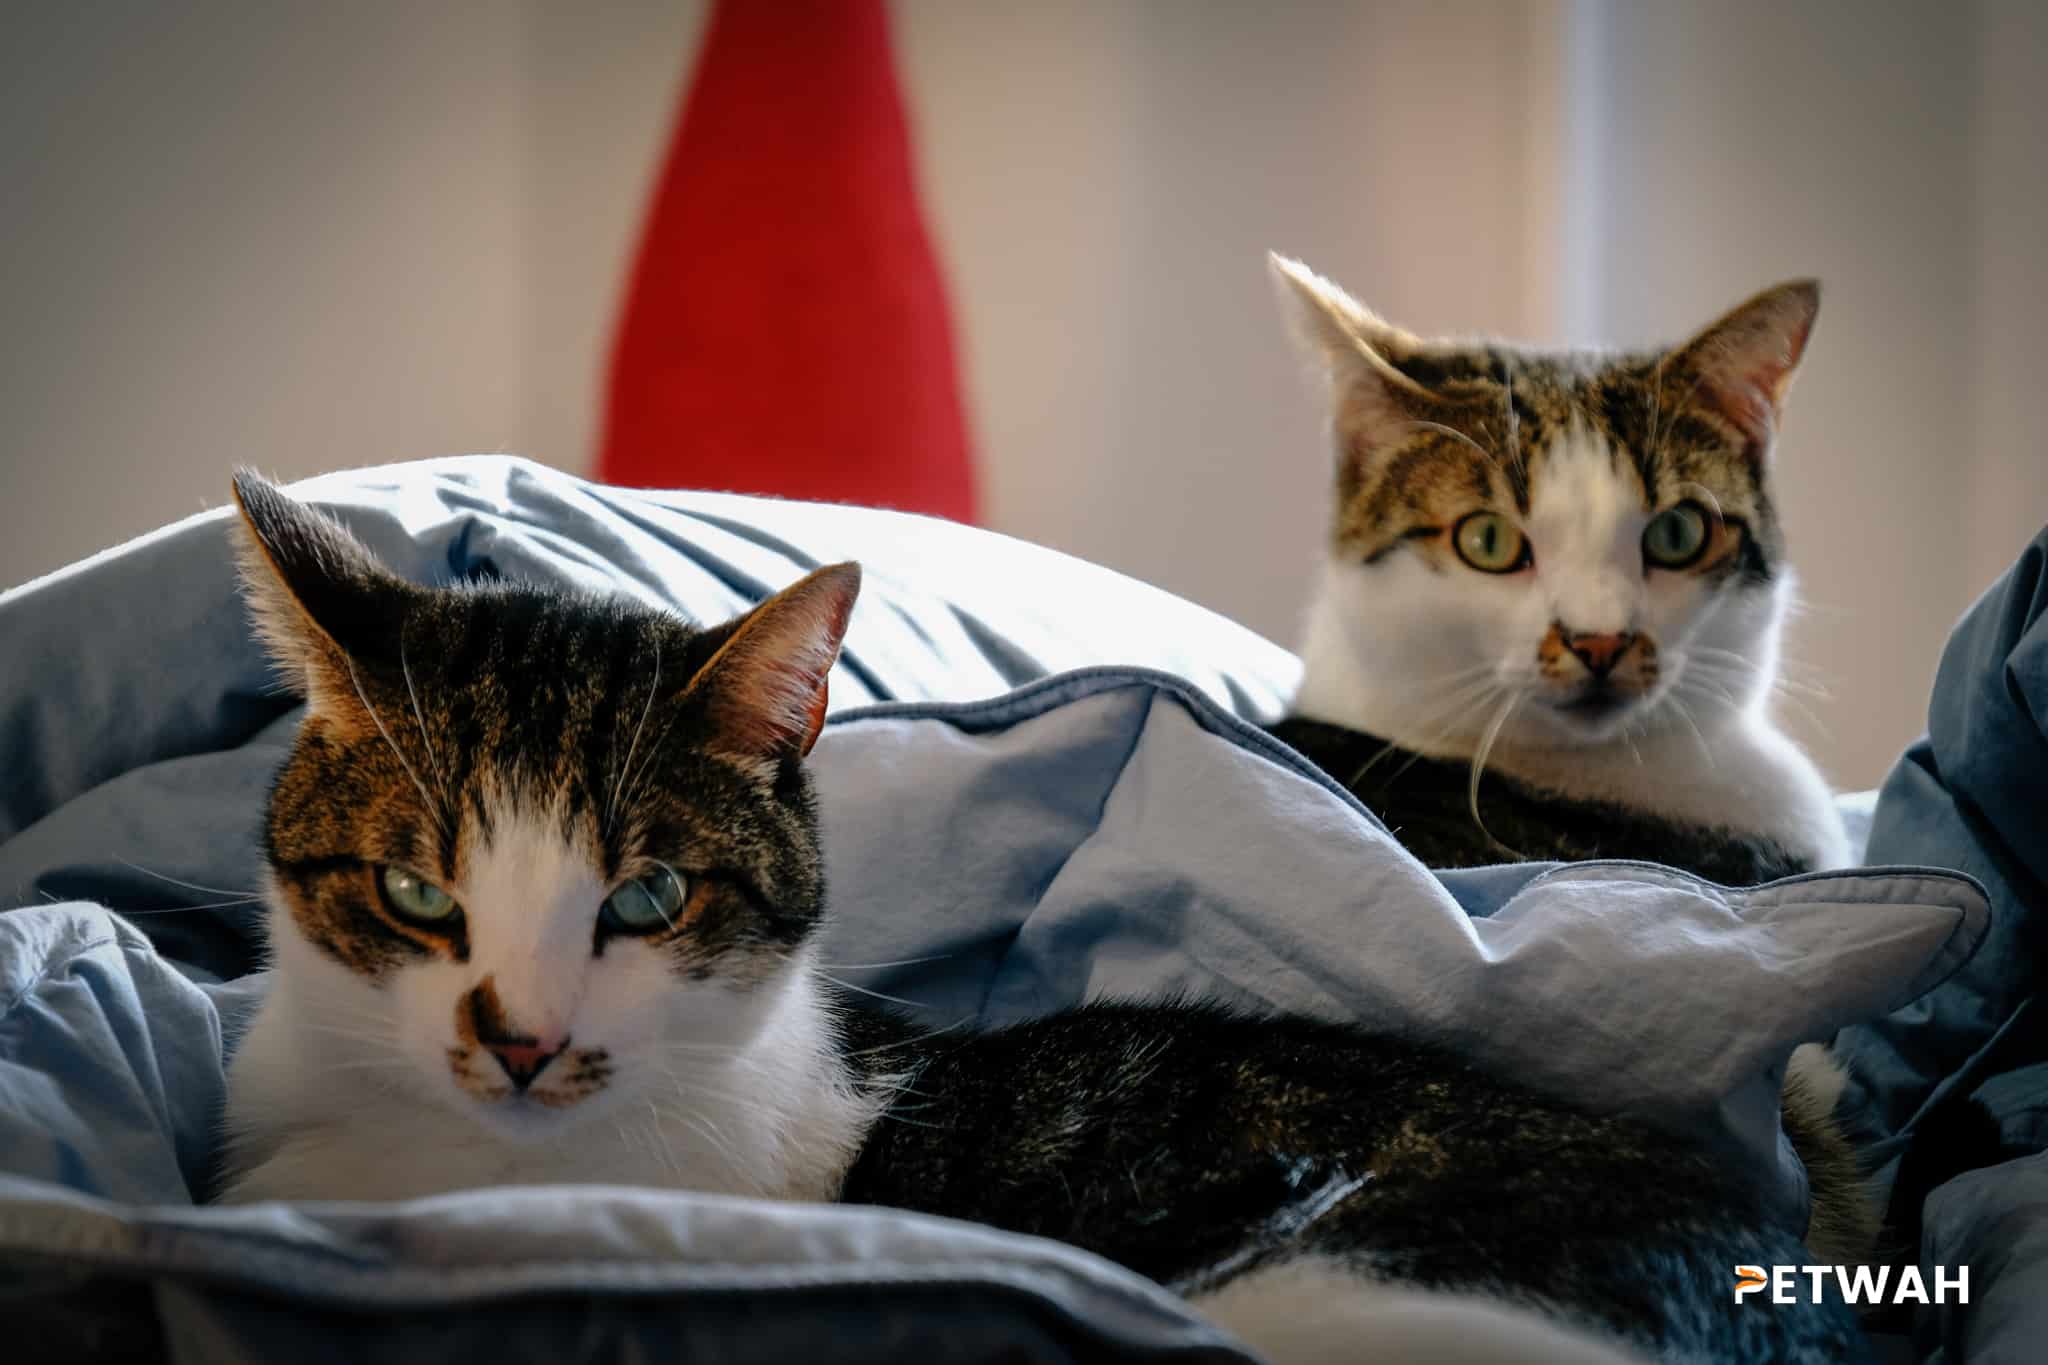 Celebrating Your Cat's Milestones and Birthdays: Tips for Couples